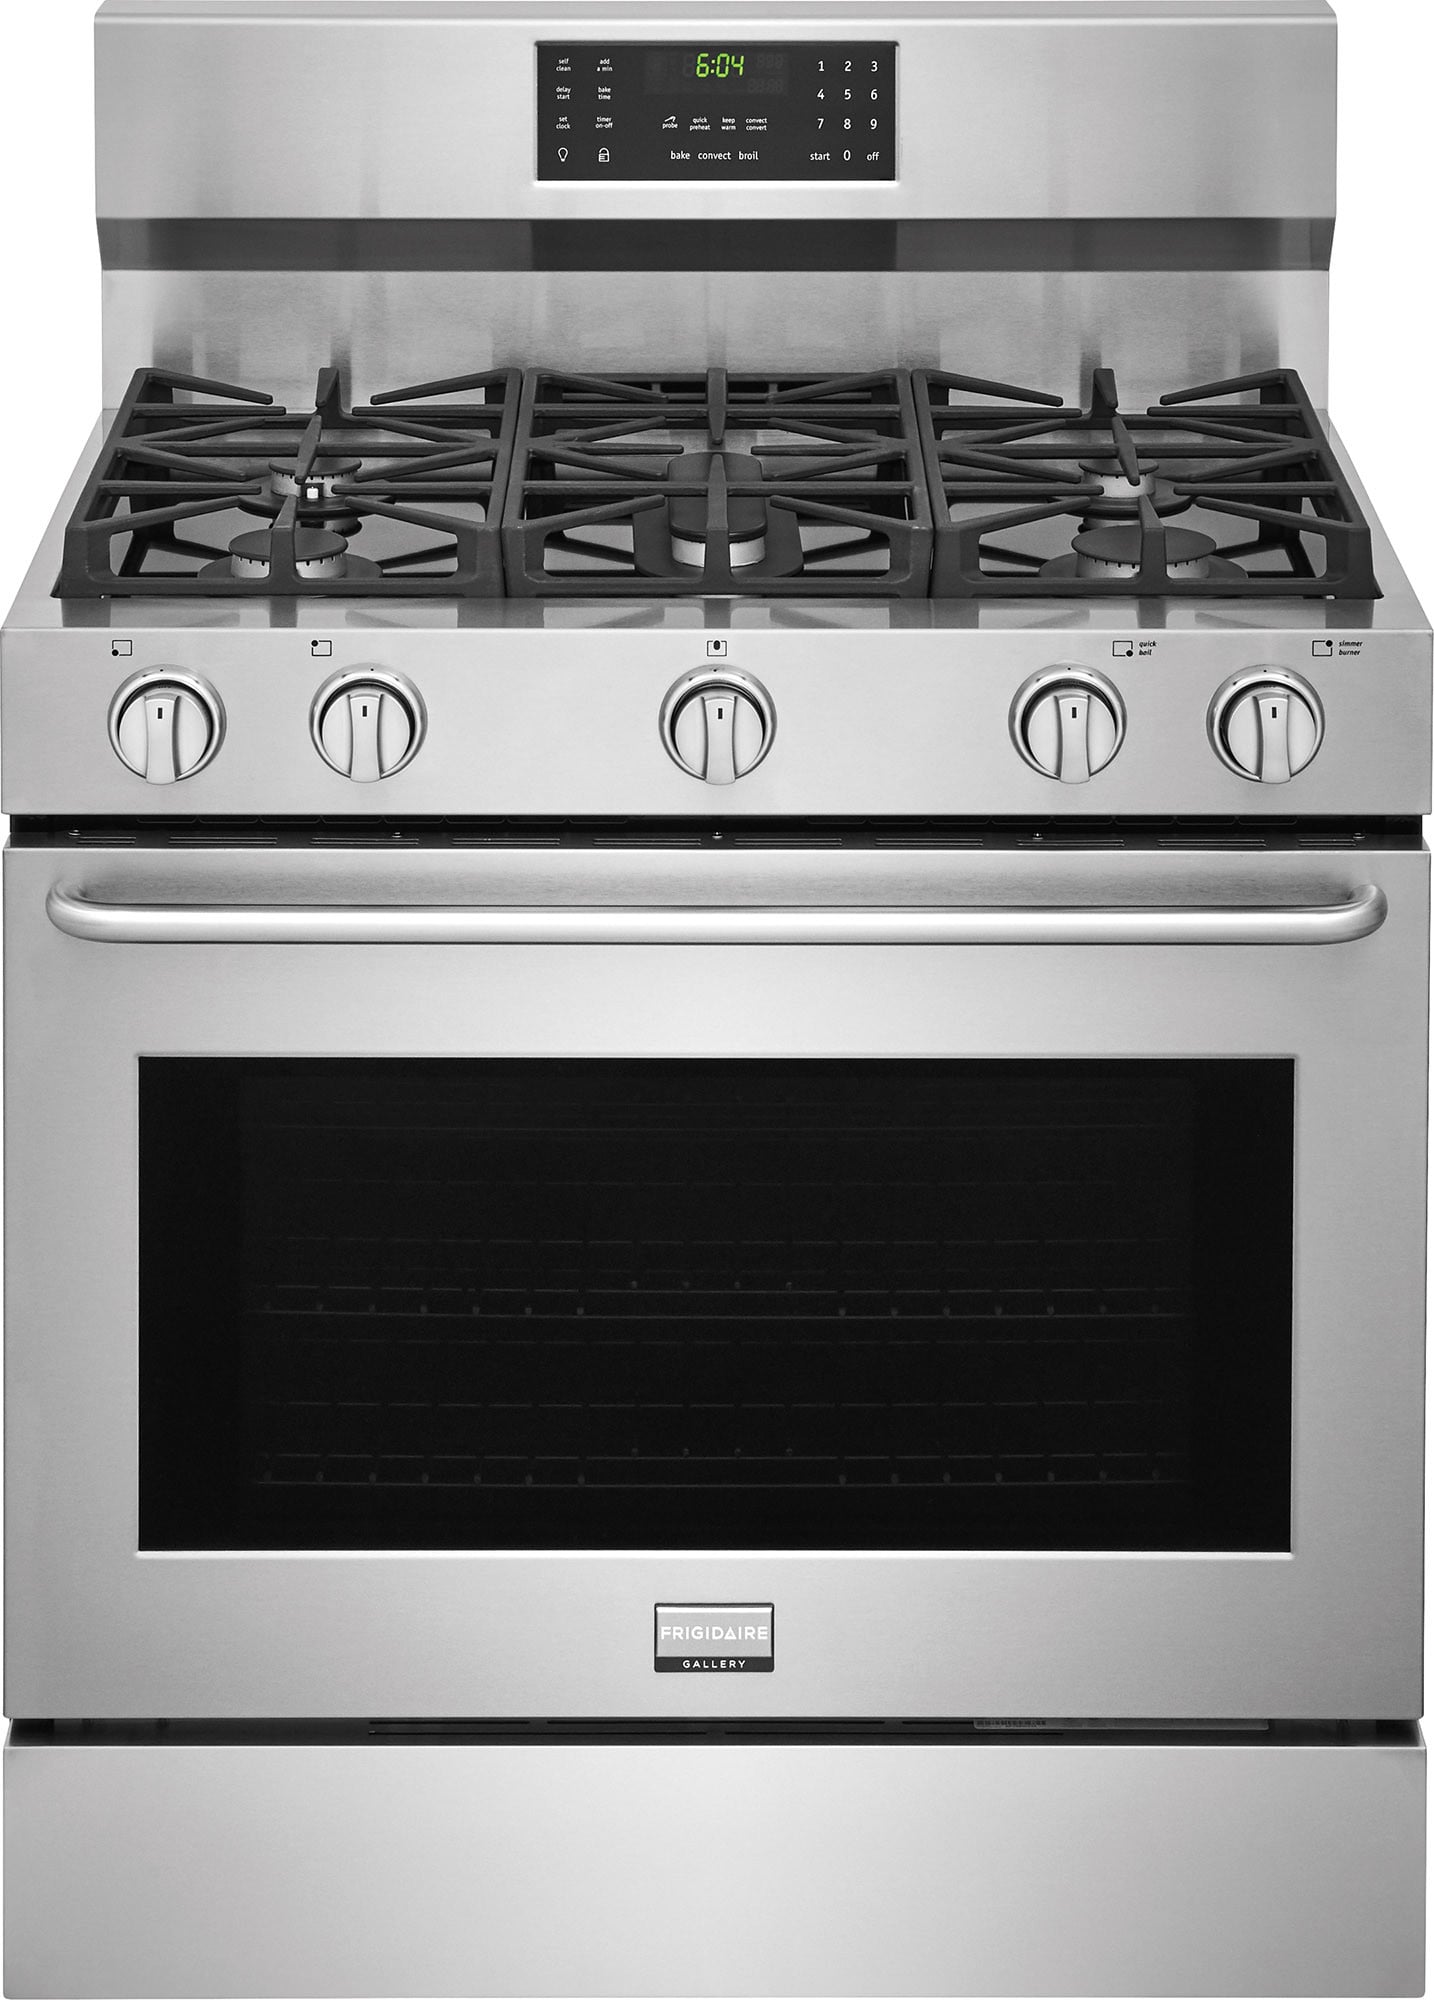 Frigidaire FGGF3685TS 36 Inch Freestanding Range with True Convection, Effortless ...1434 x 2000